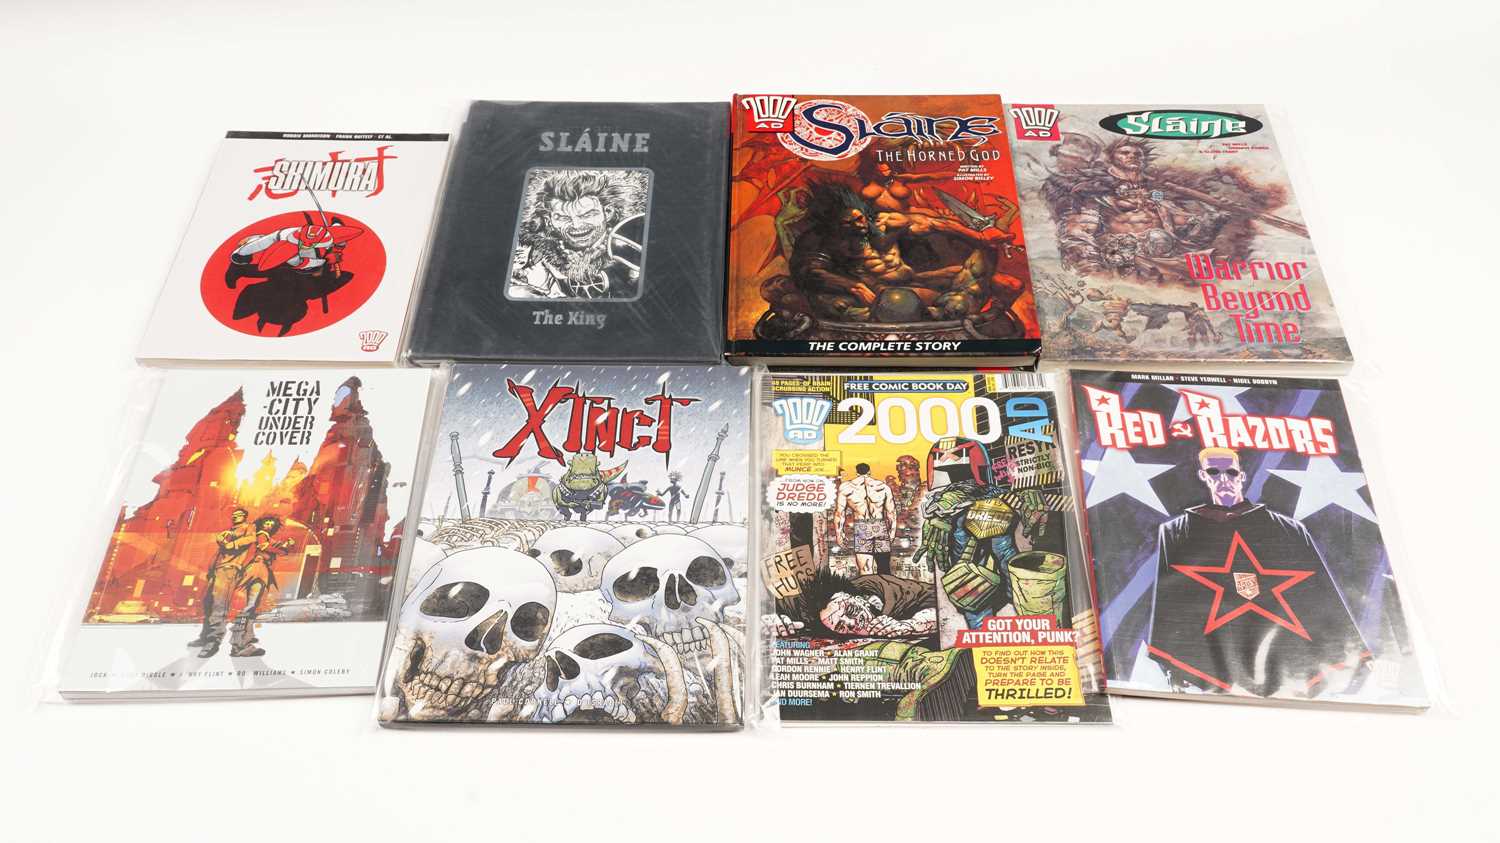 Lot 96 - Graphic novels and books by 2000 AD